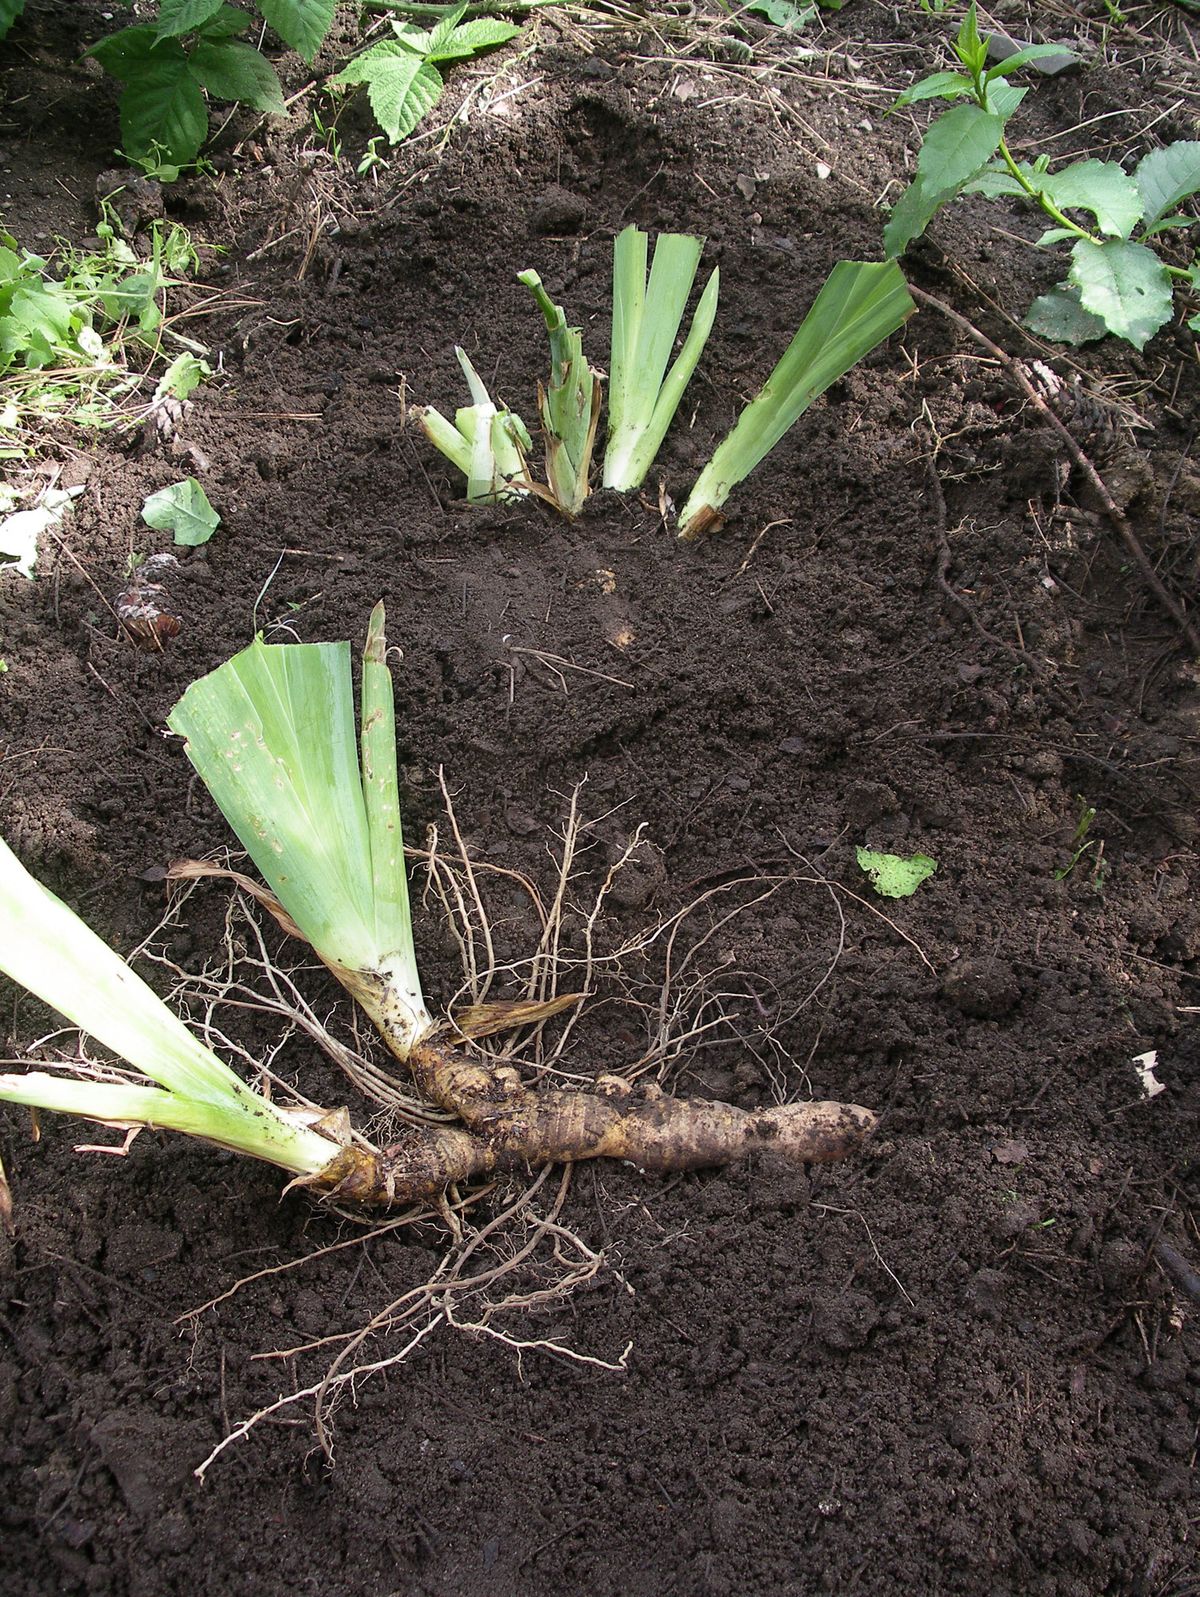 Iris rhizomes should be replanted so the top of the root is at the soil surface. (FILE PHOTOS)